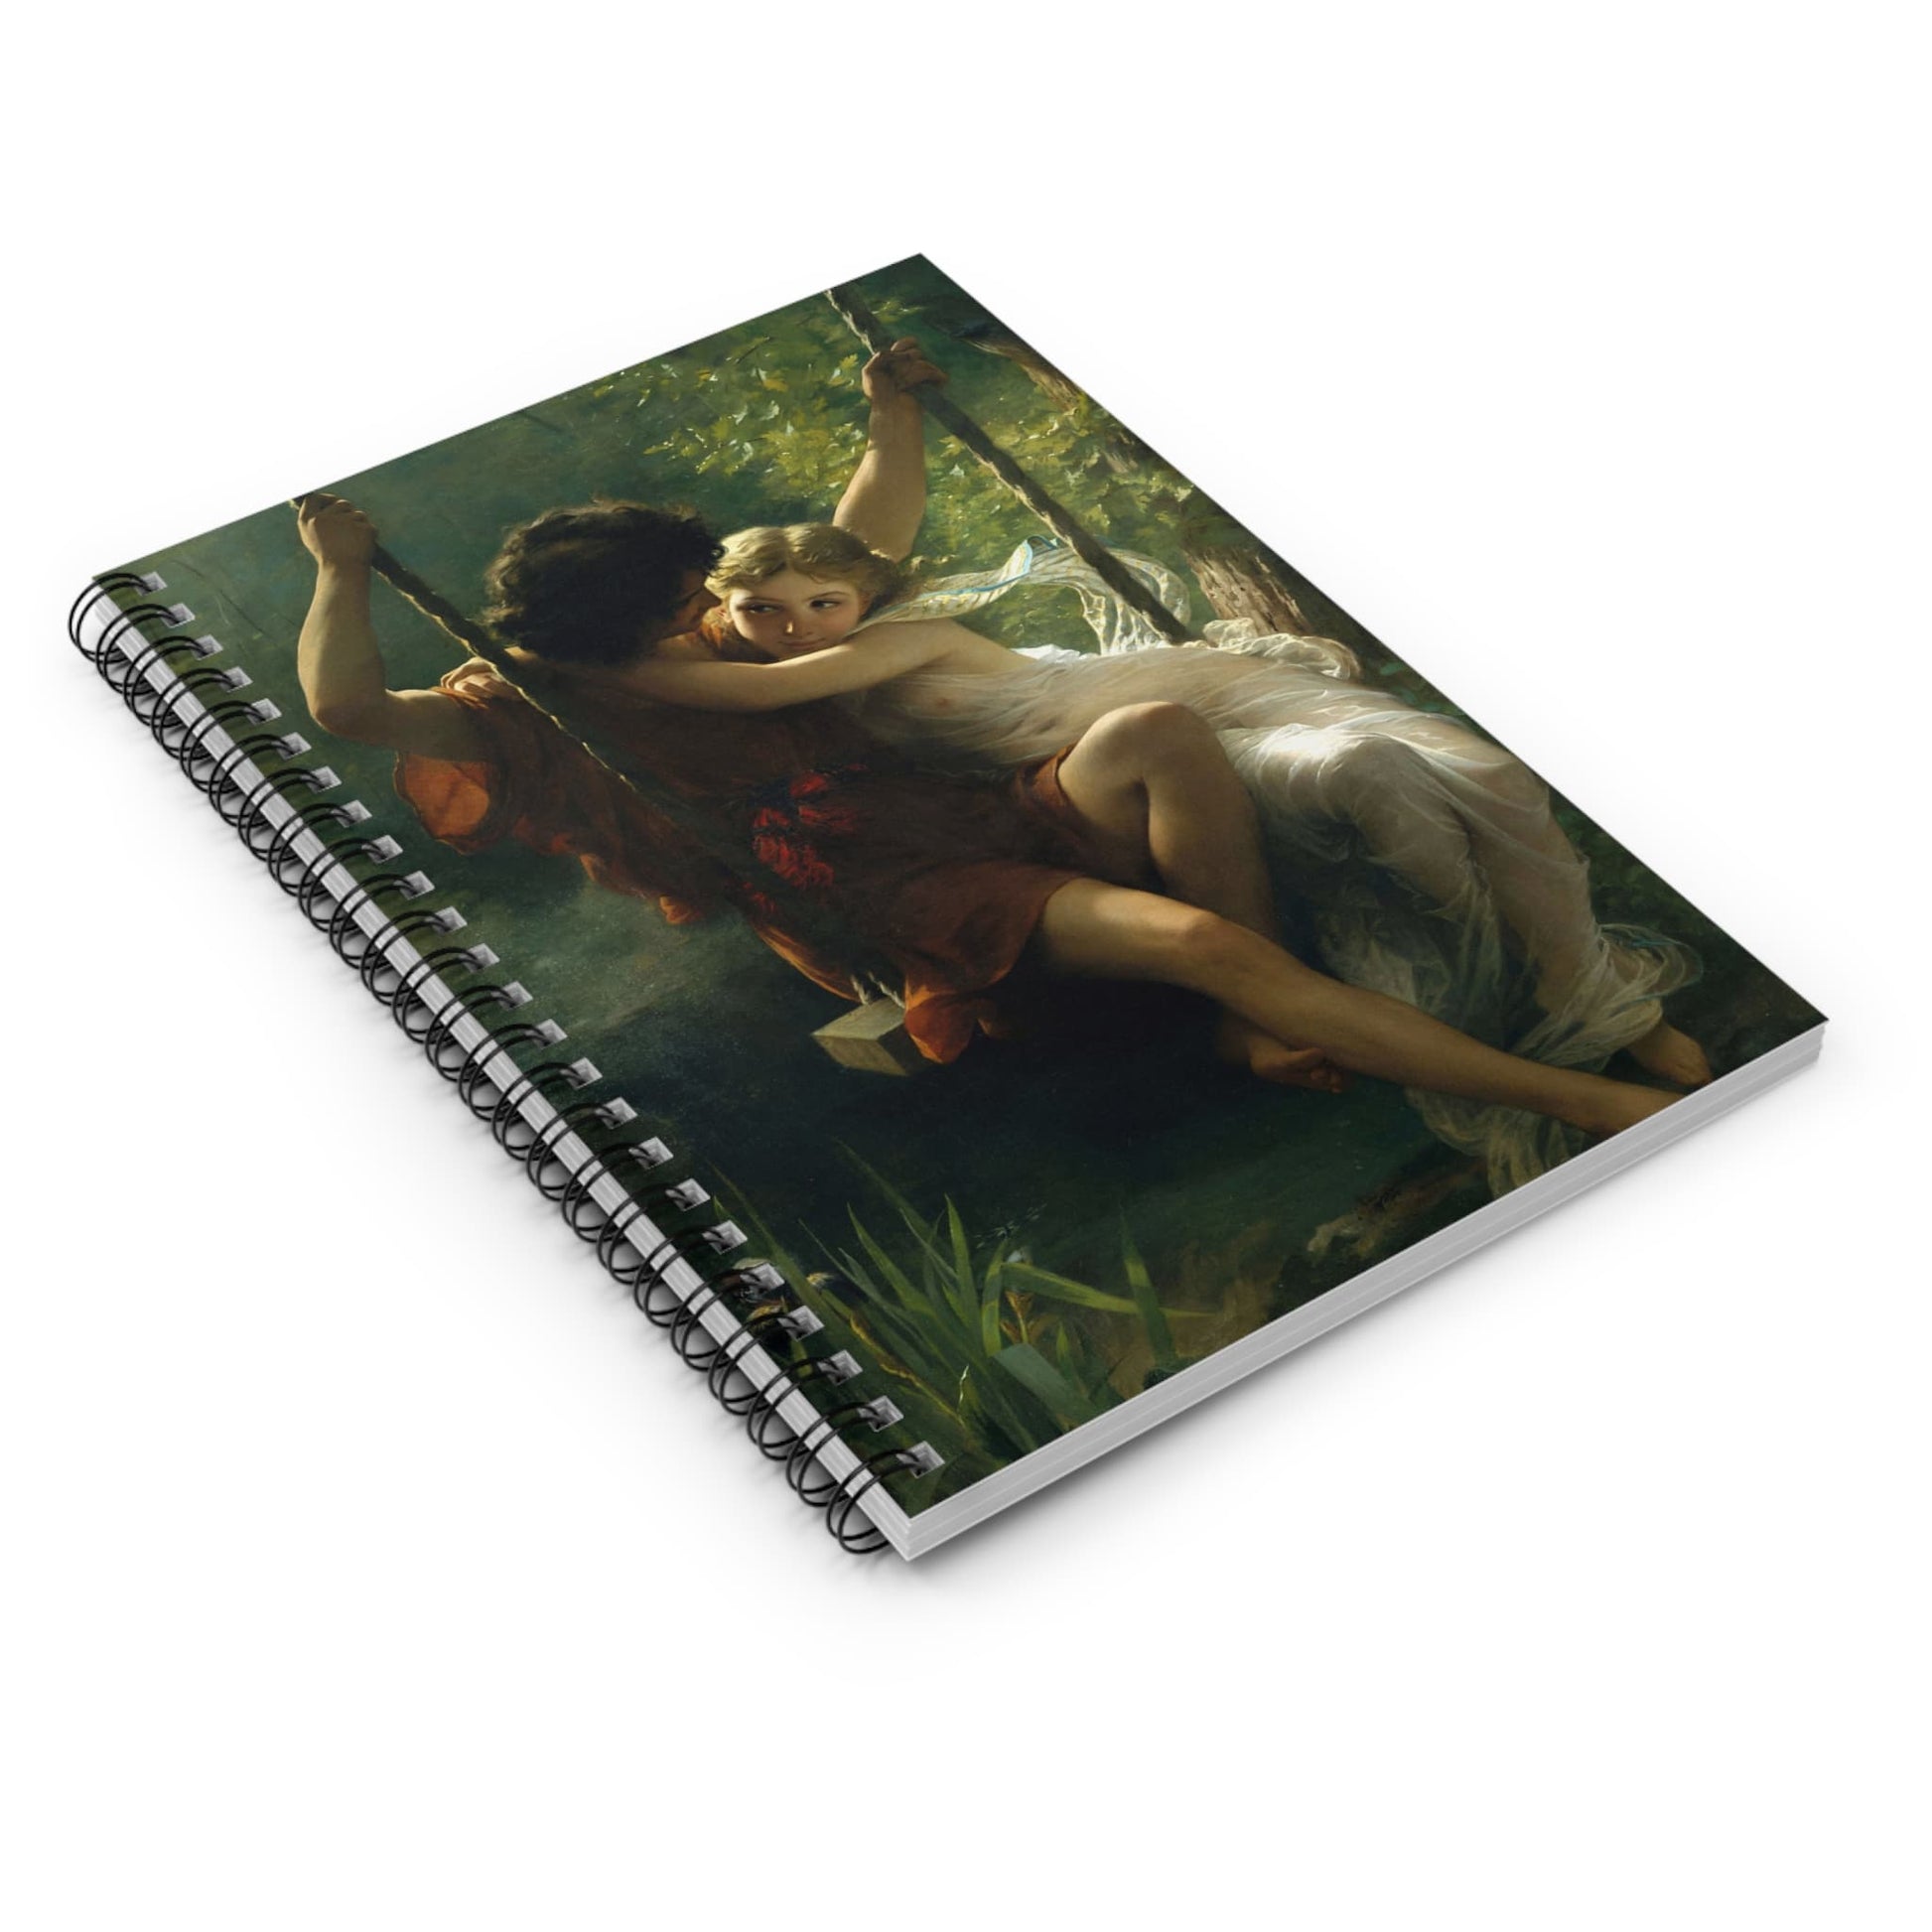 Lovers on a Swing Spiral Notebook Laying Flat on White Surface